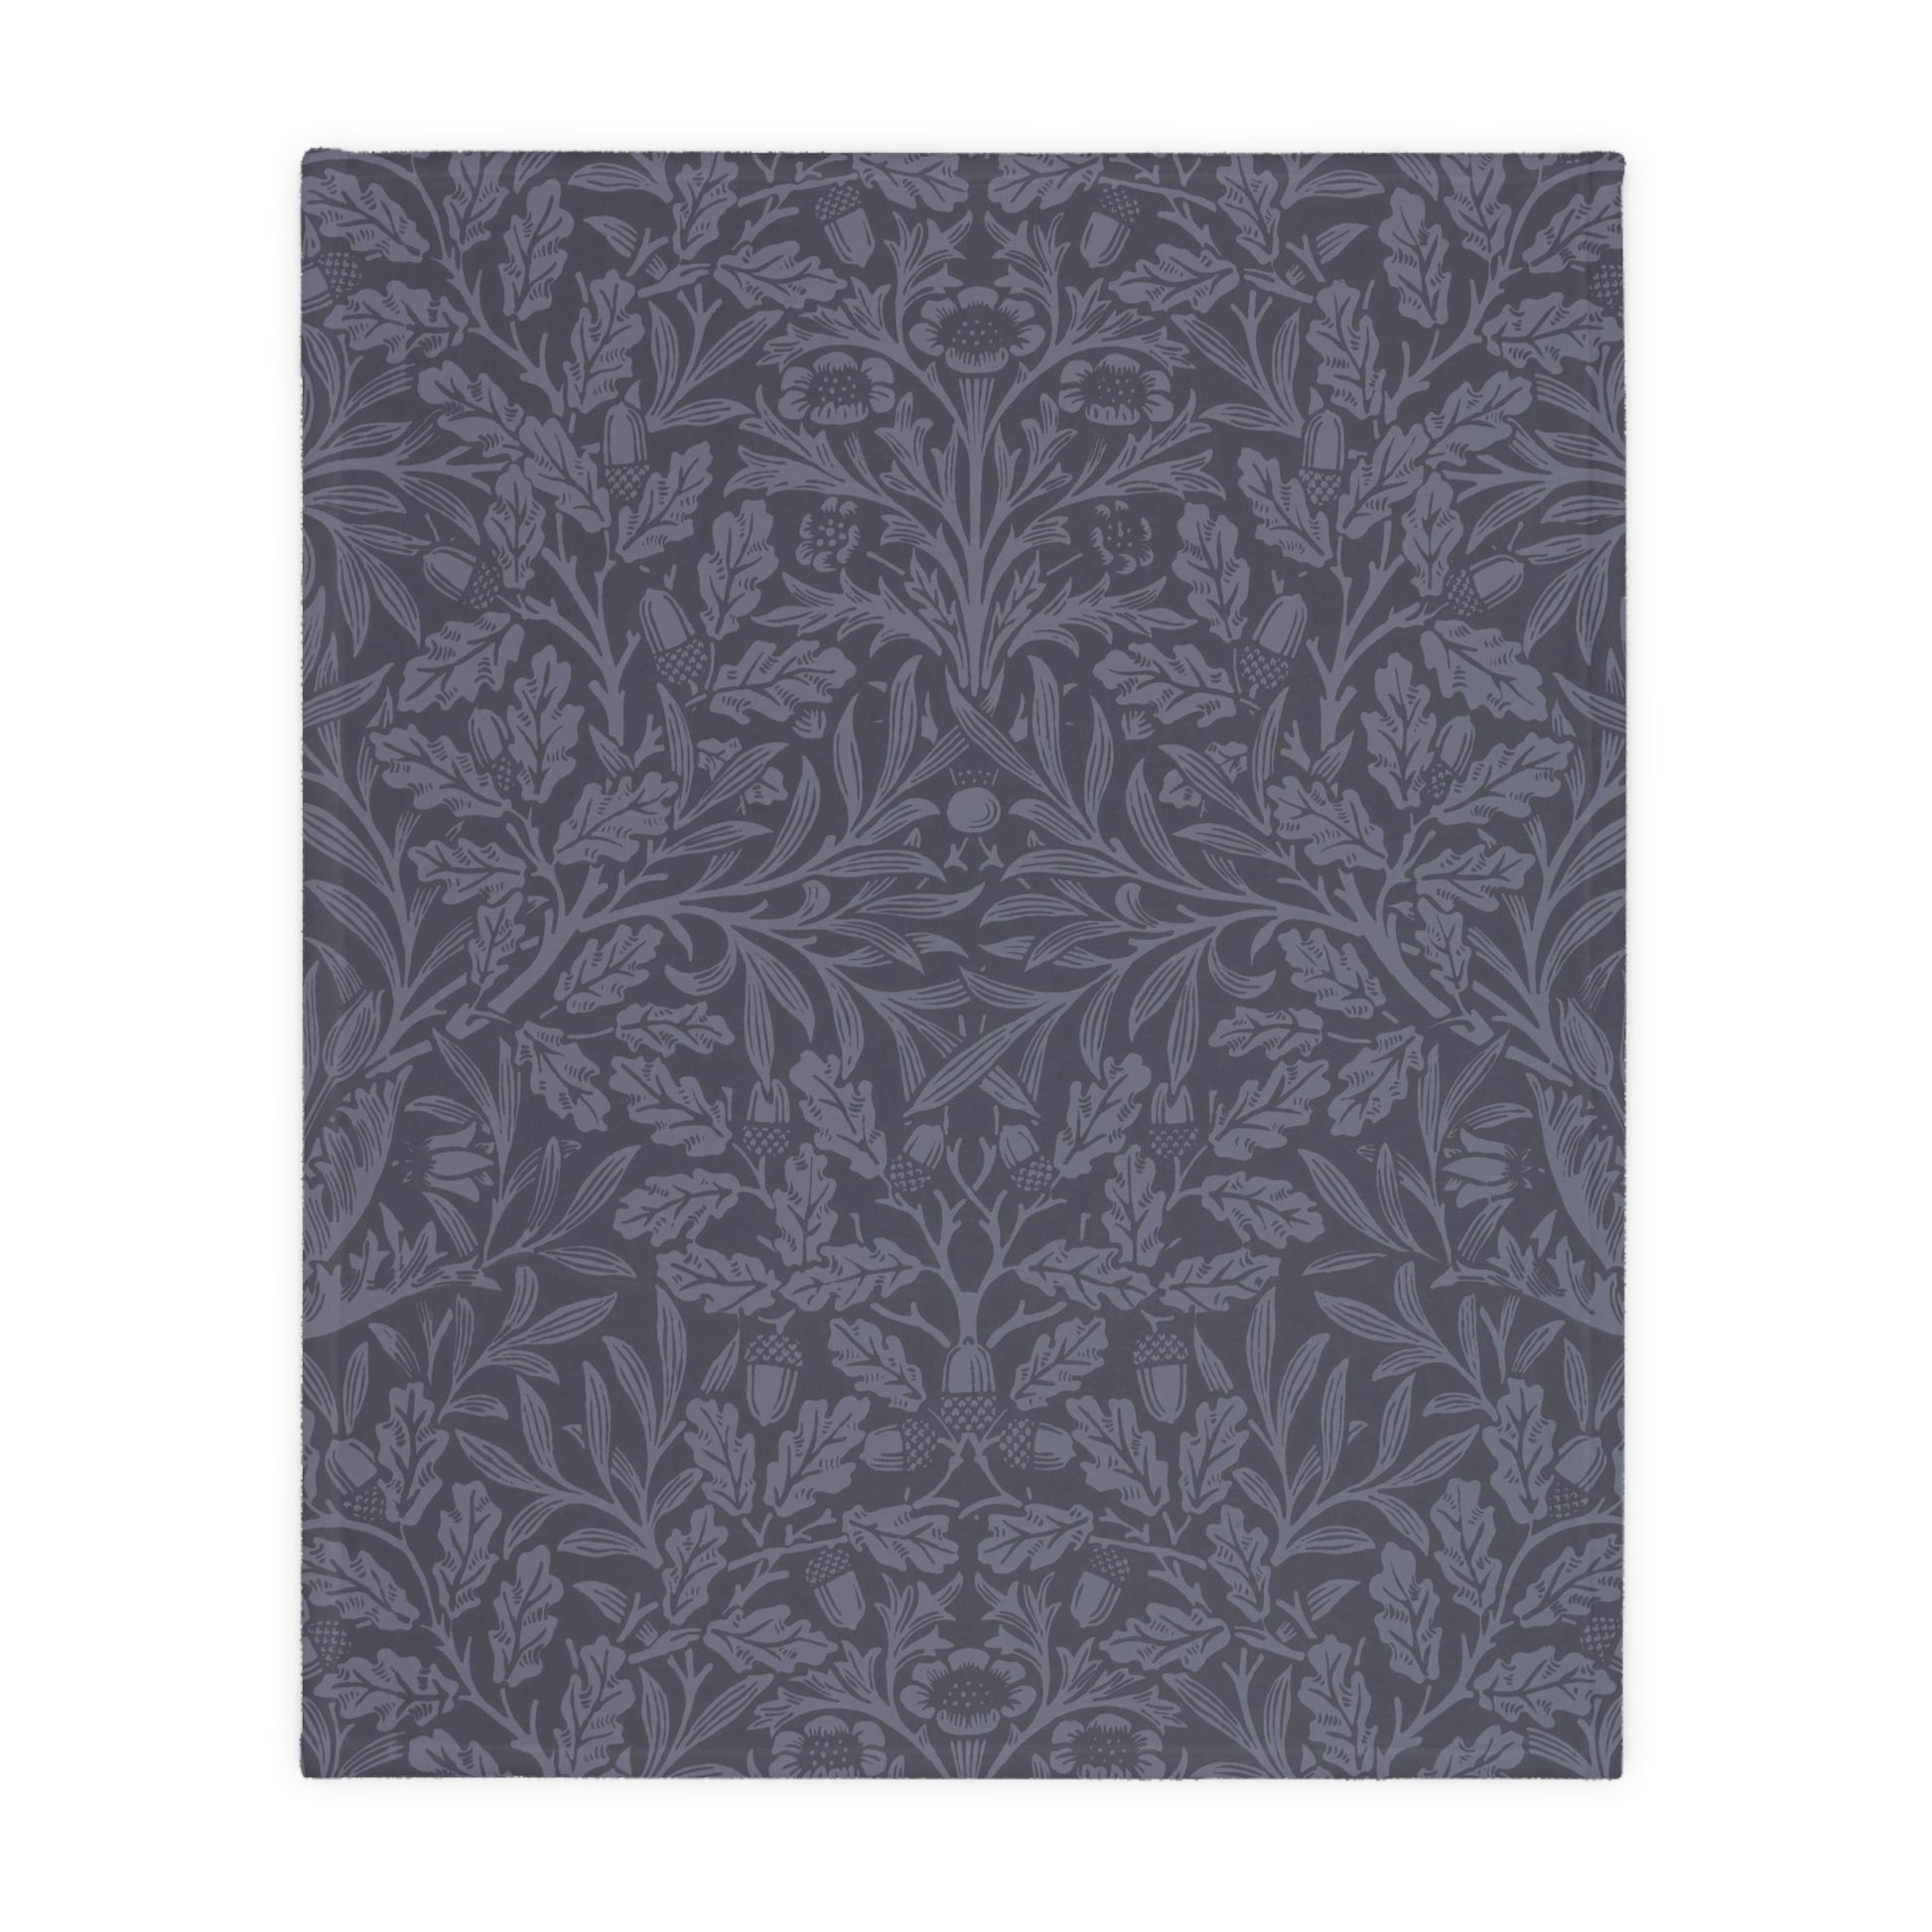 william-morris-co-luxury-velveteen-minky-blanket-two-sided-print-acorns-and-oak-leaves-collection-13